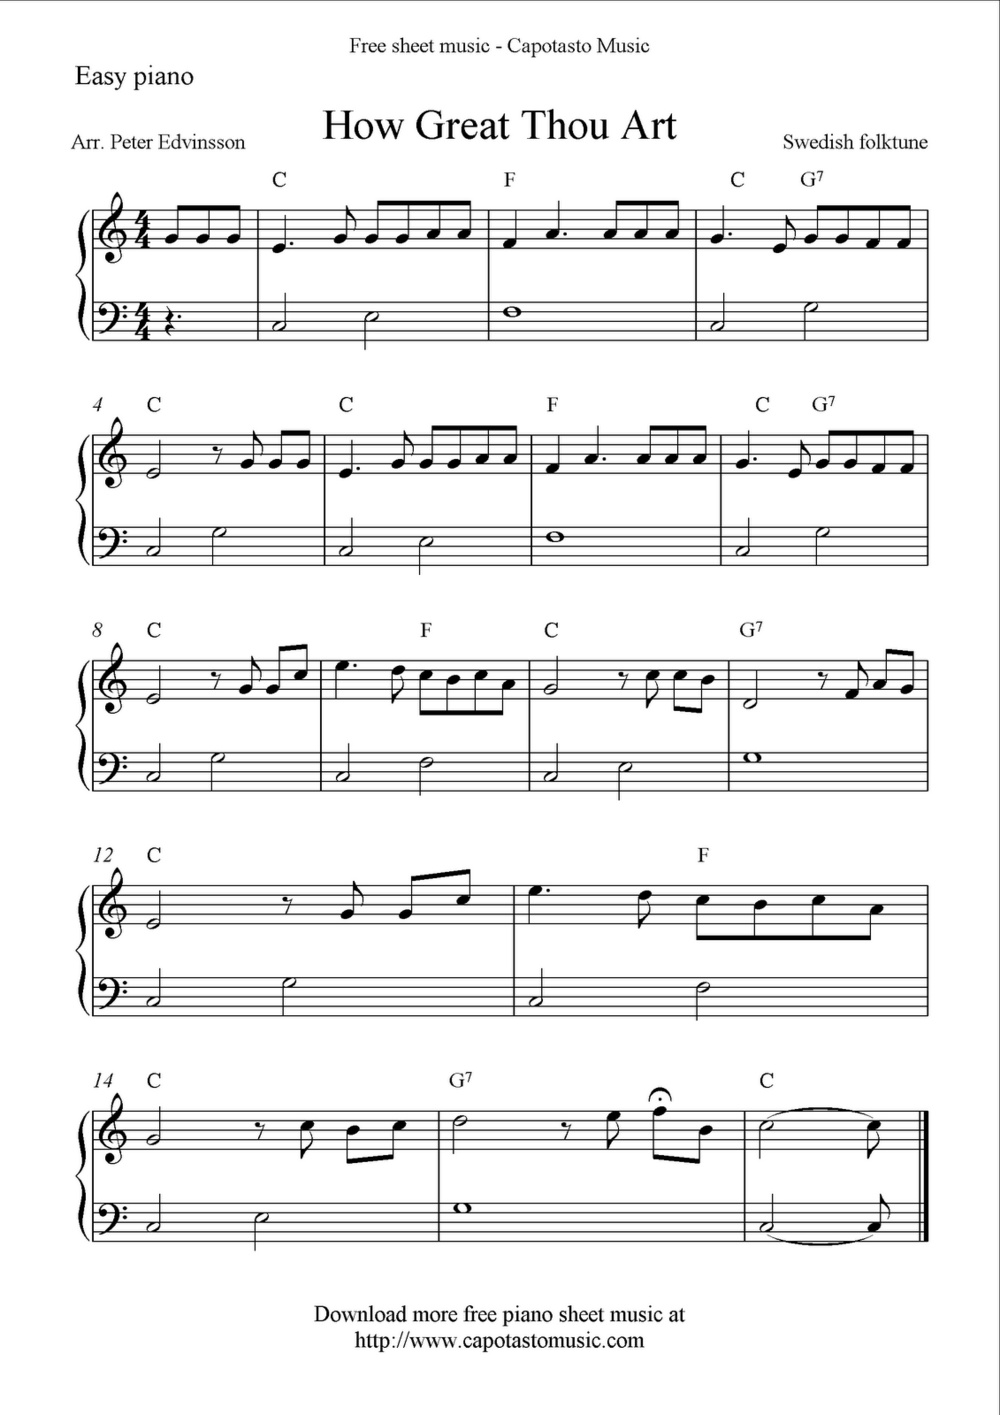 6 Tips For Using Free Piano Sheet Music on Your iPad